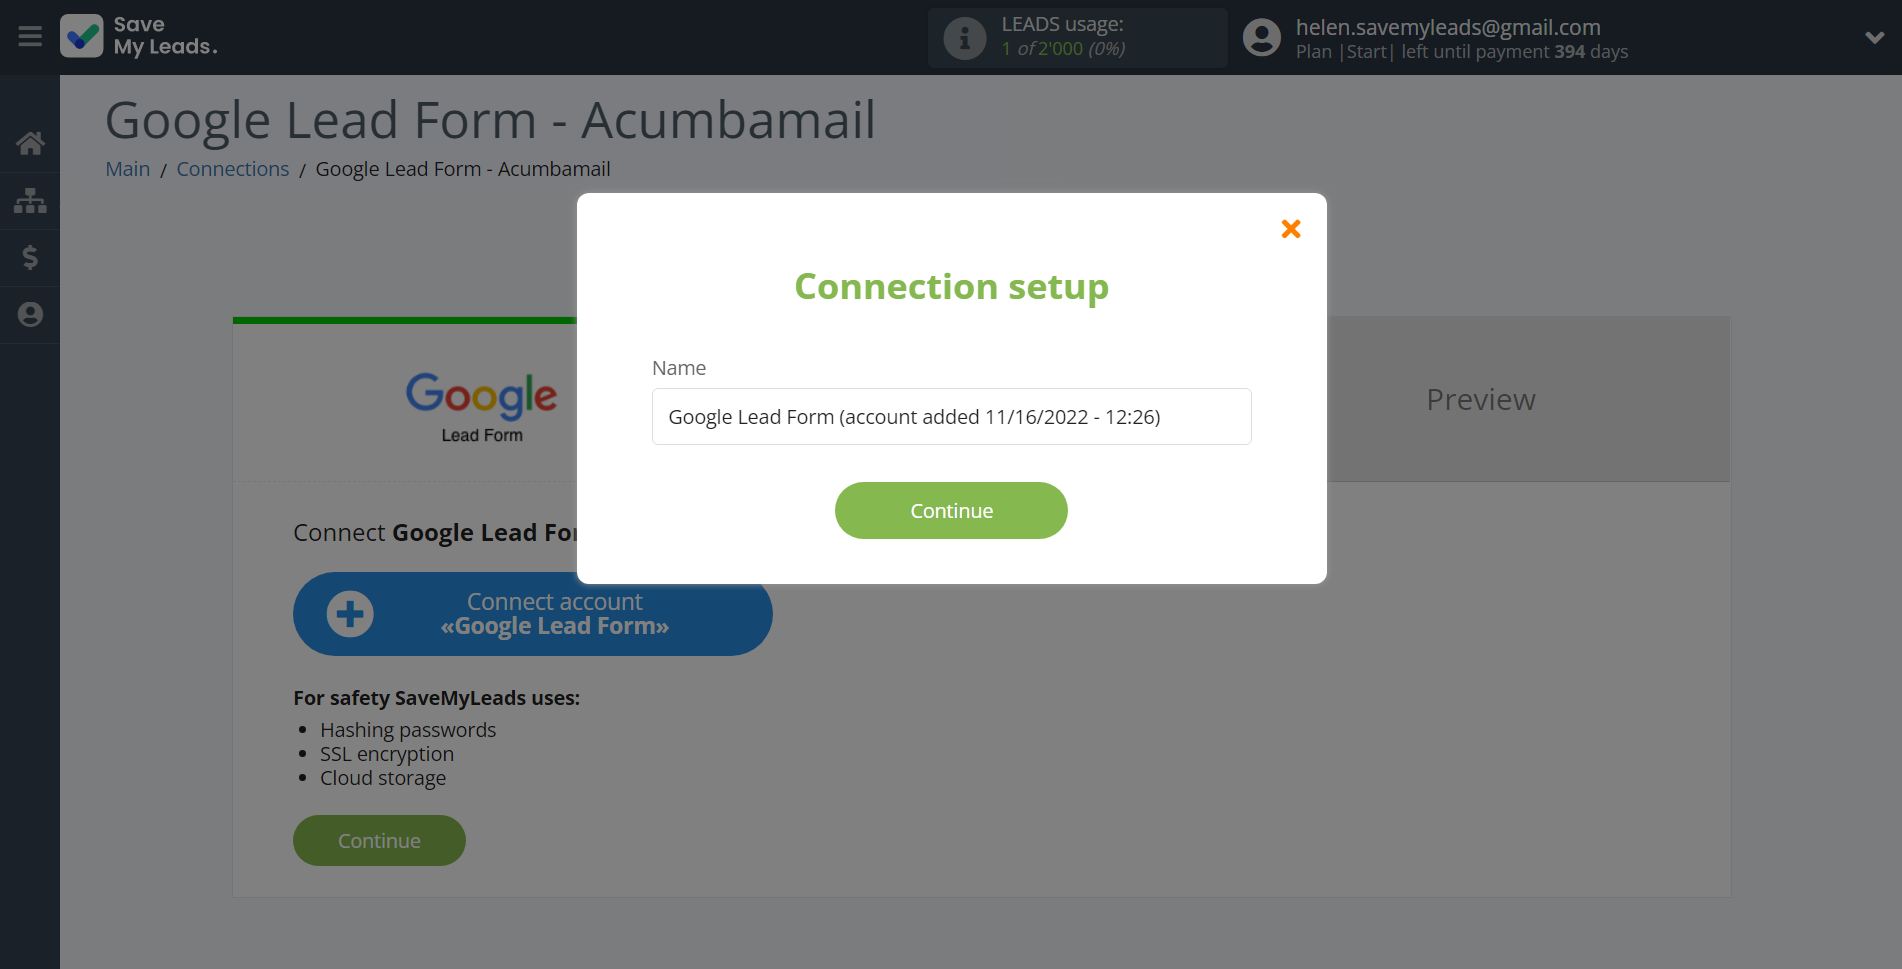 How to Connect Google Lead Form with Acumbamail Send SMS | Data Source account connection